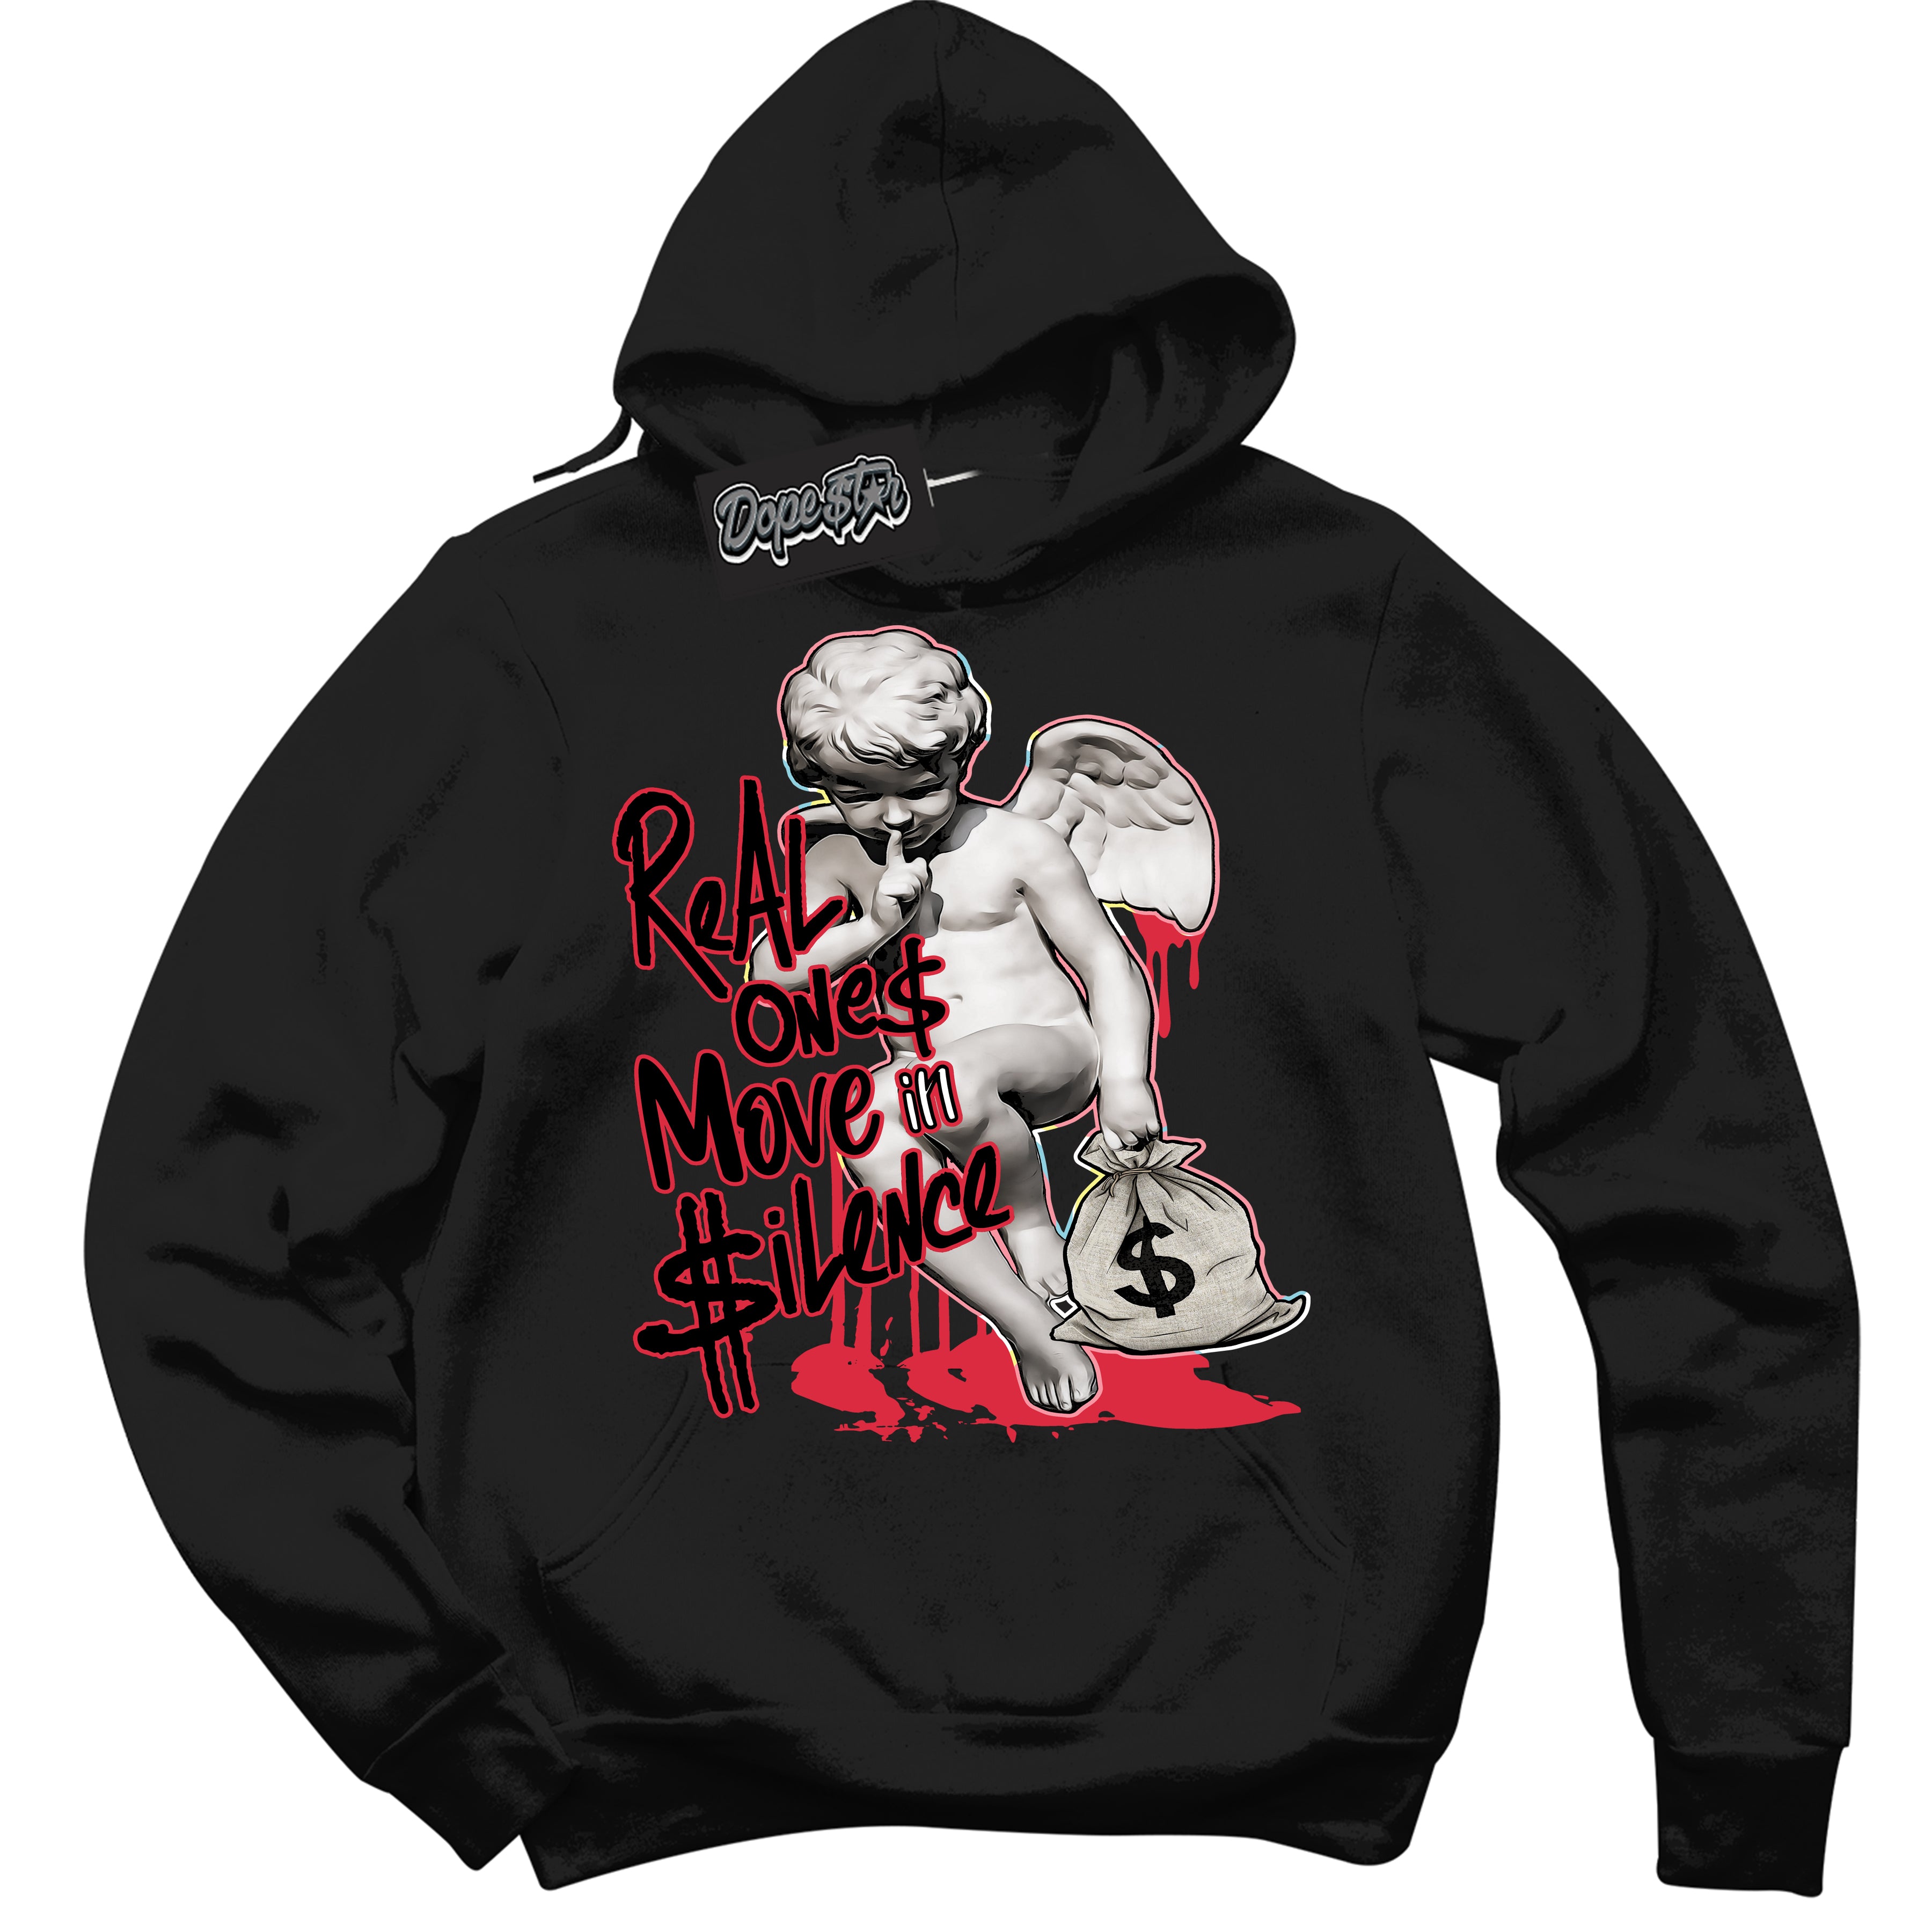 Cool Black Graphic DopeStar Hoodie with “ Real Ones Cherub “ print, that perfectly matches Spider-Verse 1s sneakers